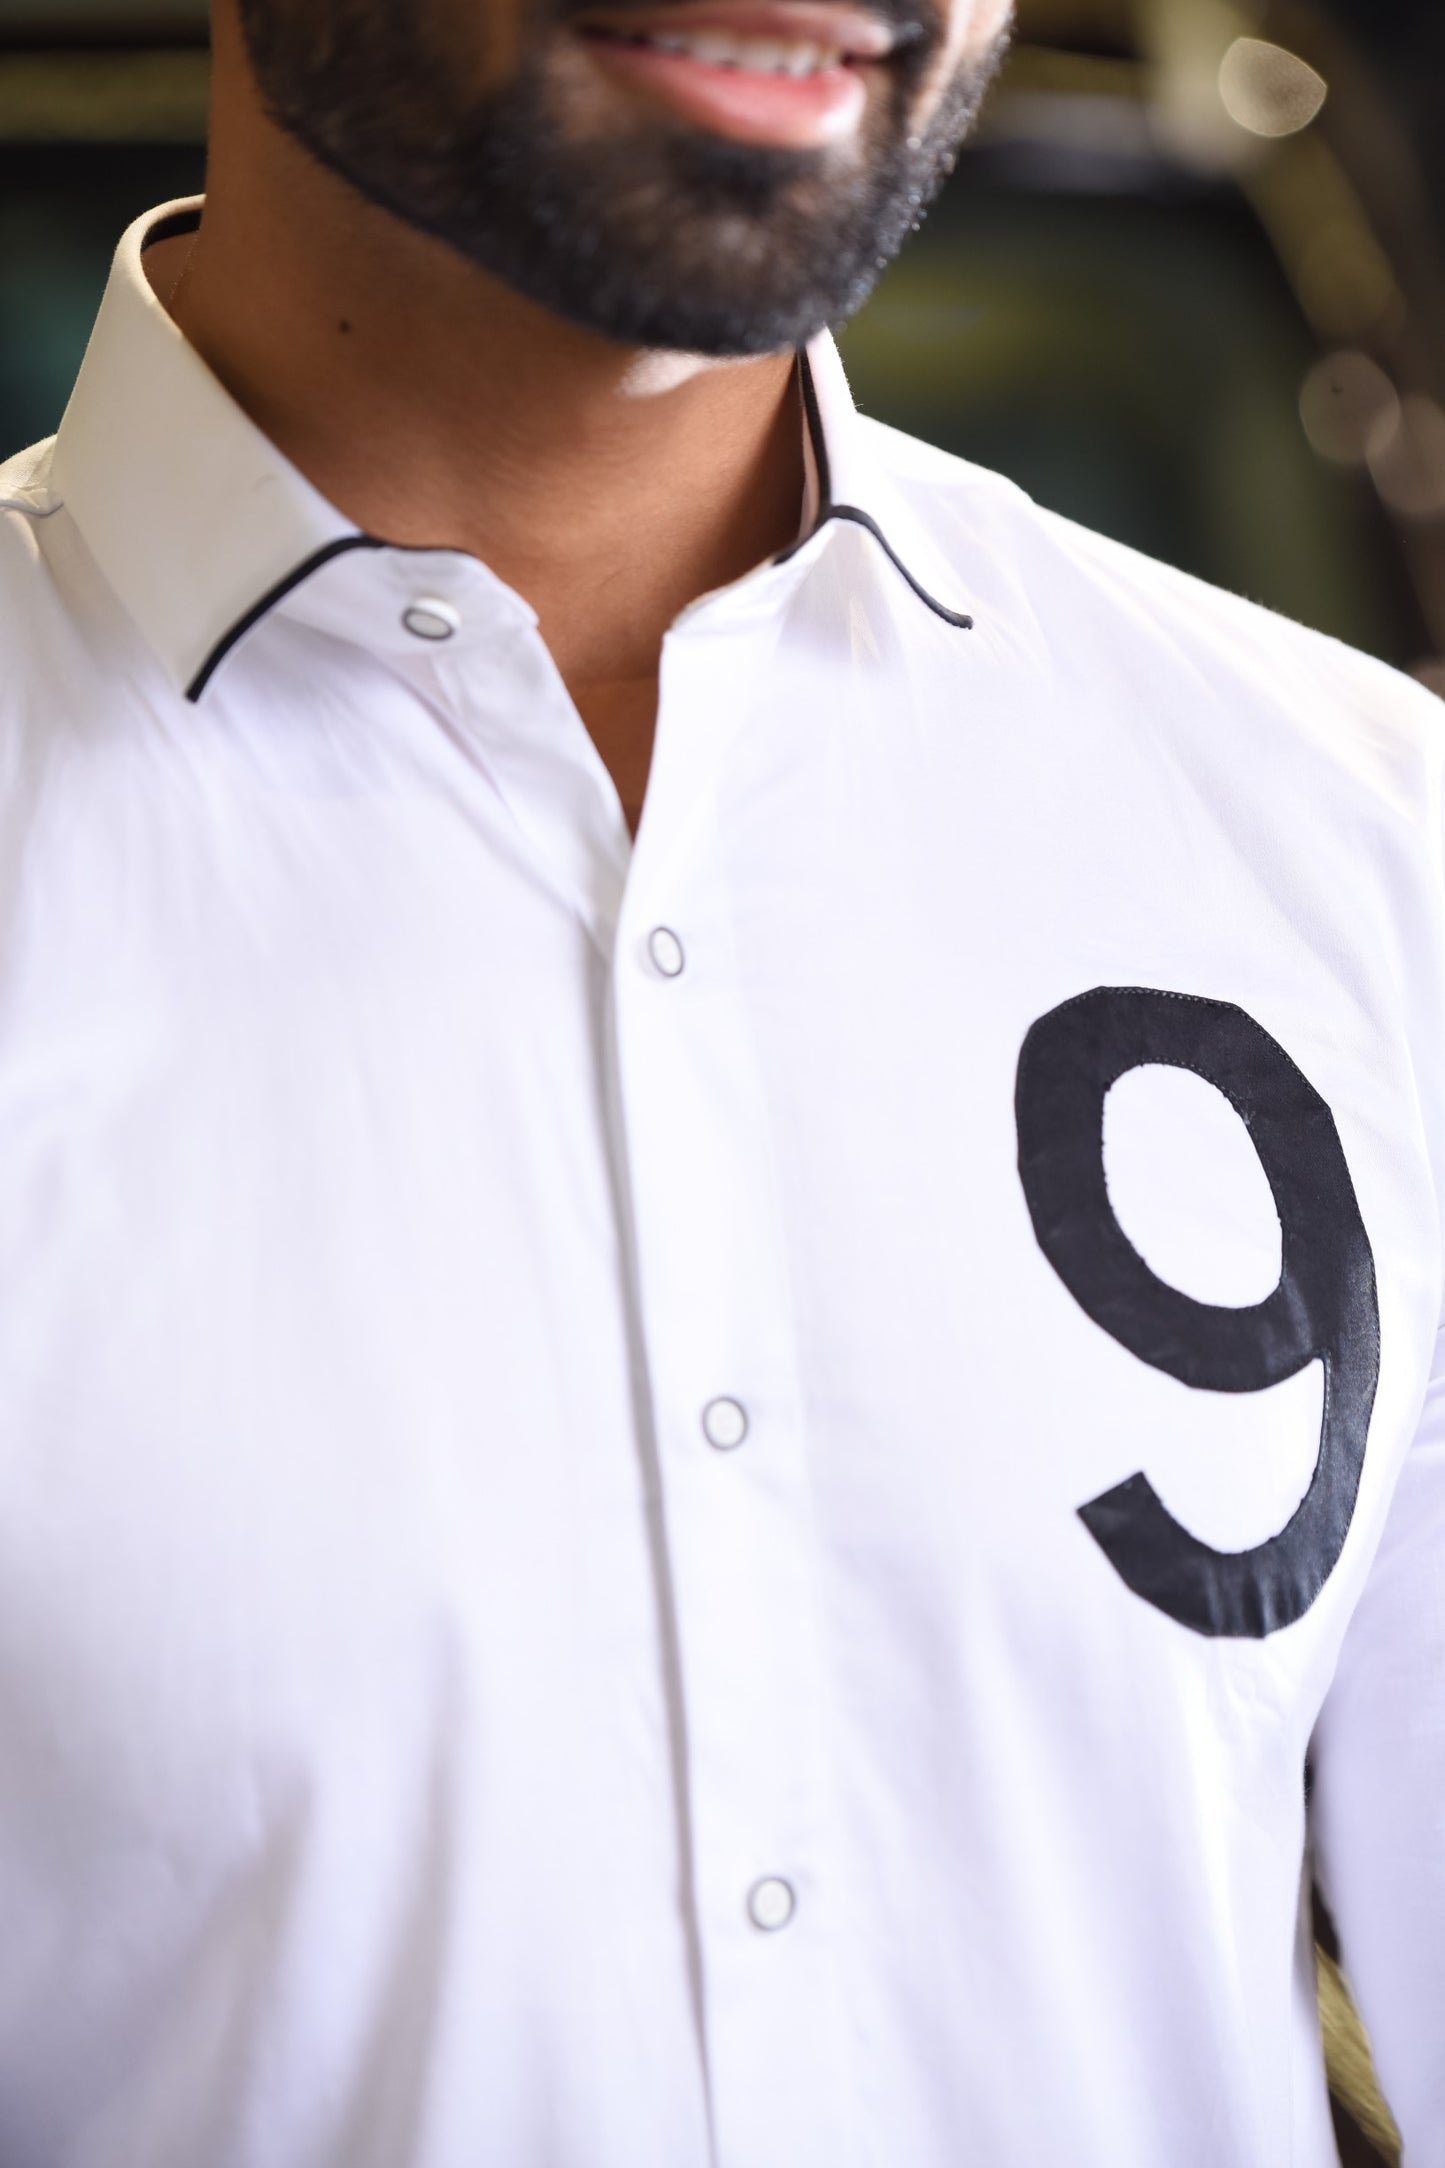 White Solid 9 Shirt